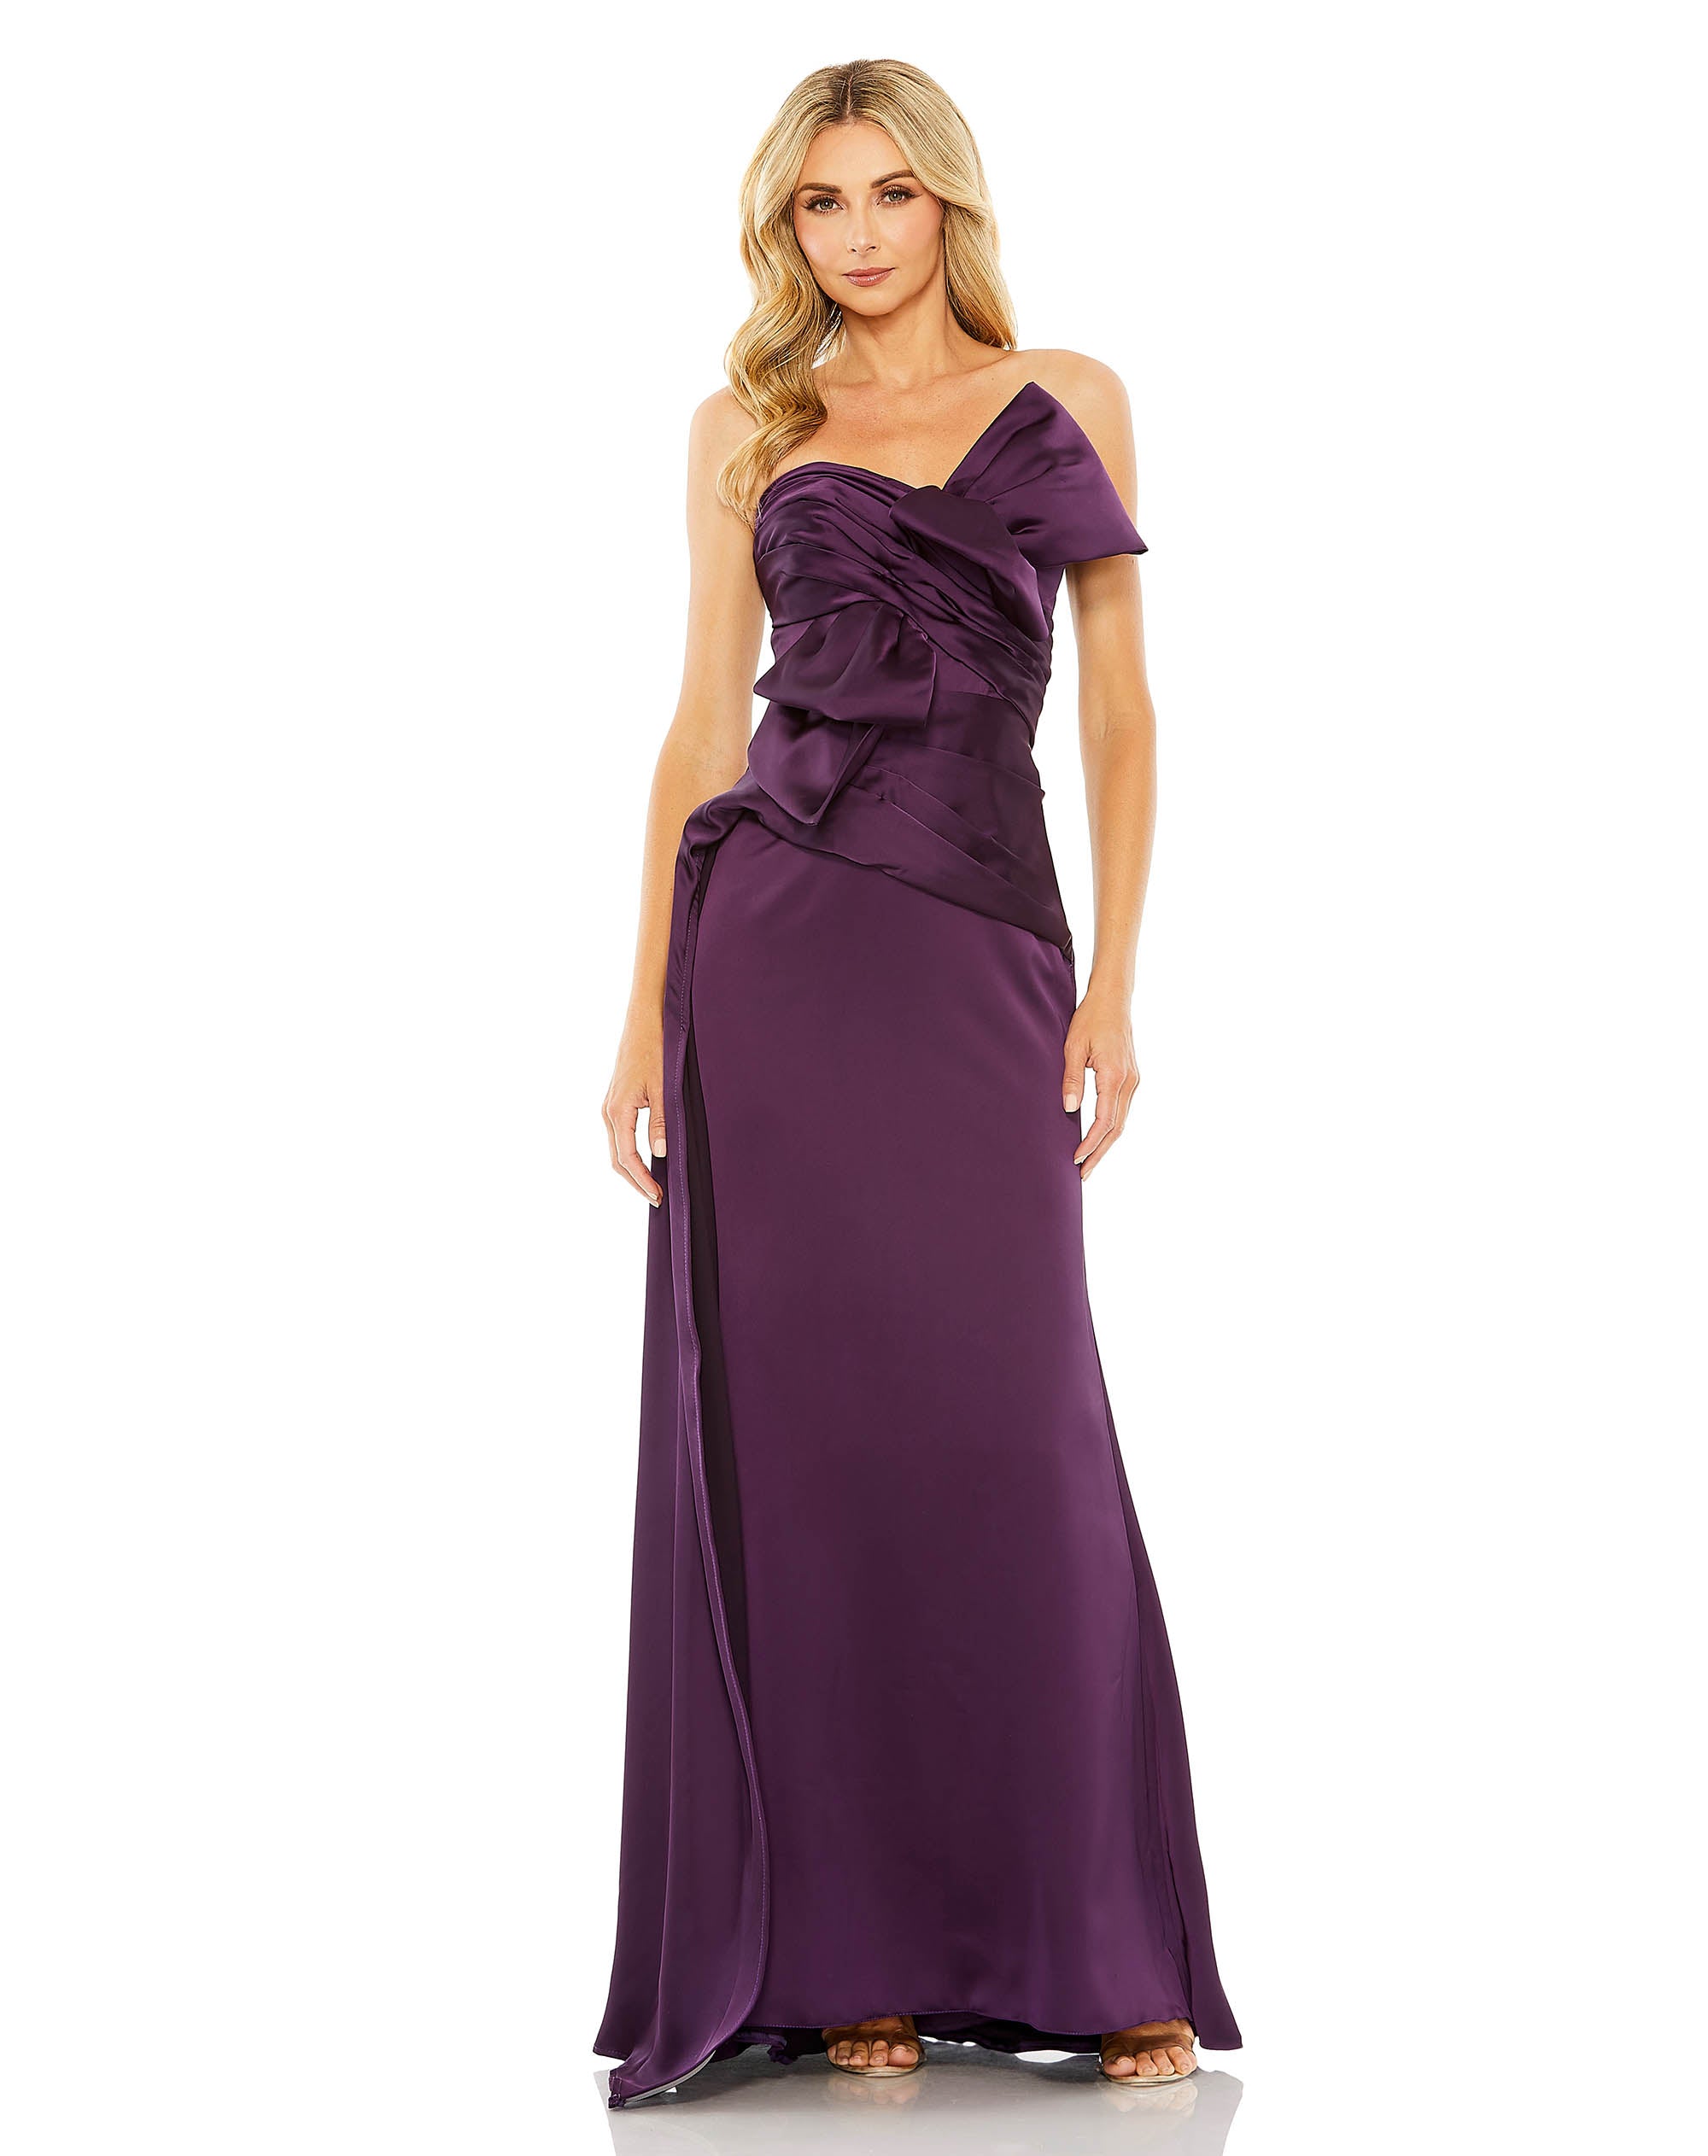 Strapless Bow Front Detailed Gown